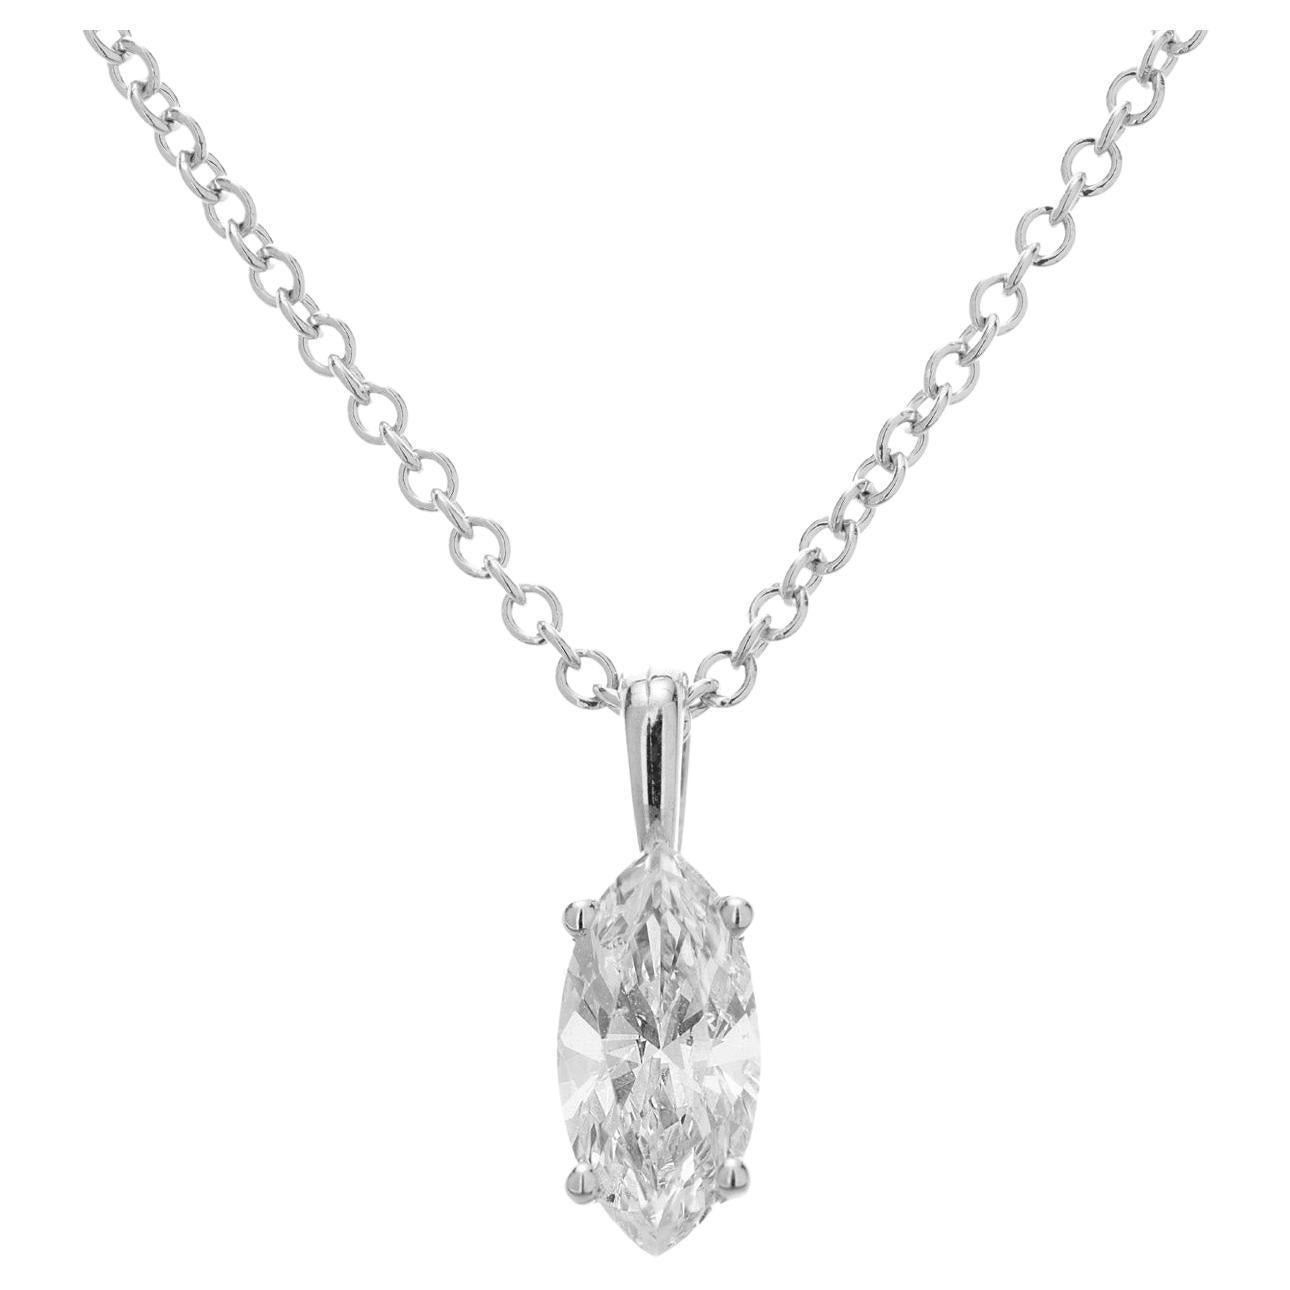 Peter Suchy GIA Certified .60 Carat Diamond White Gold Pendant Necklace